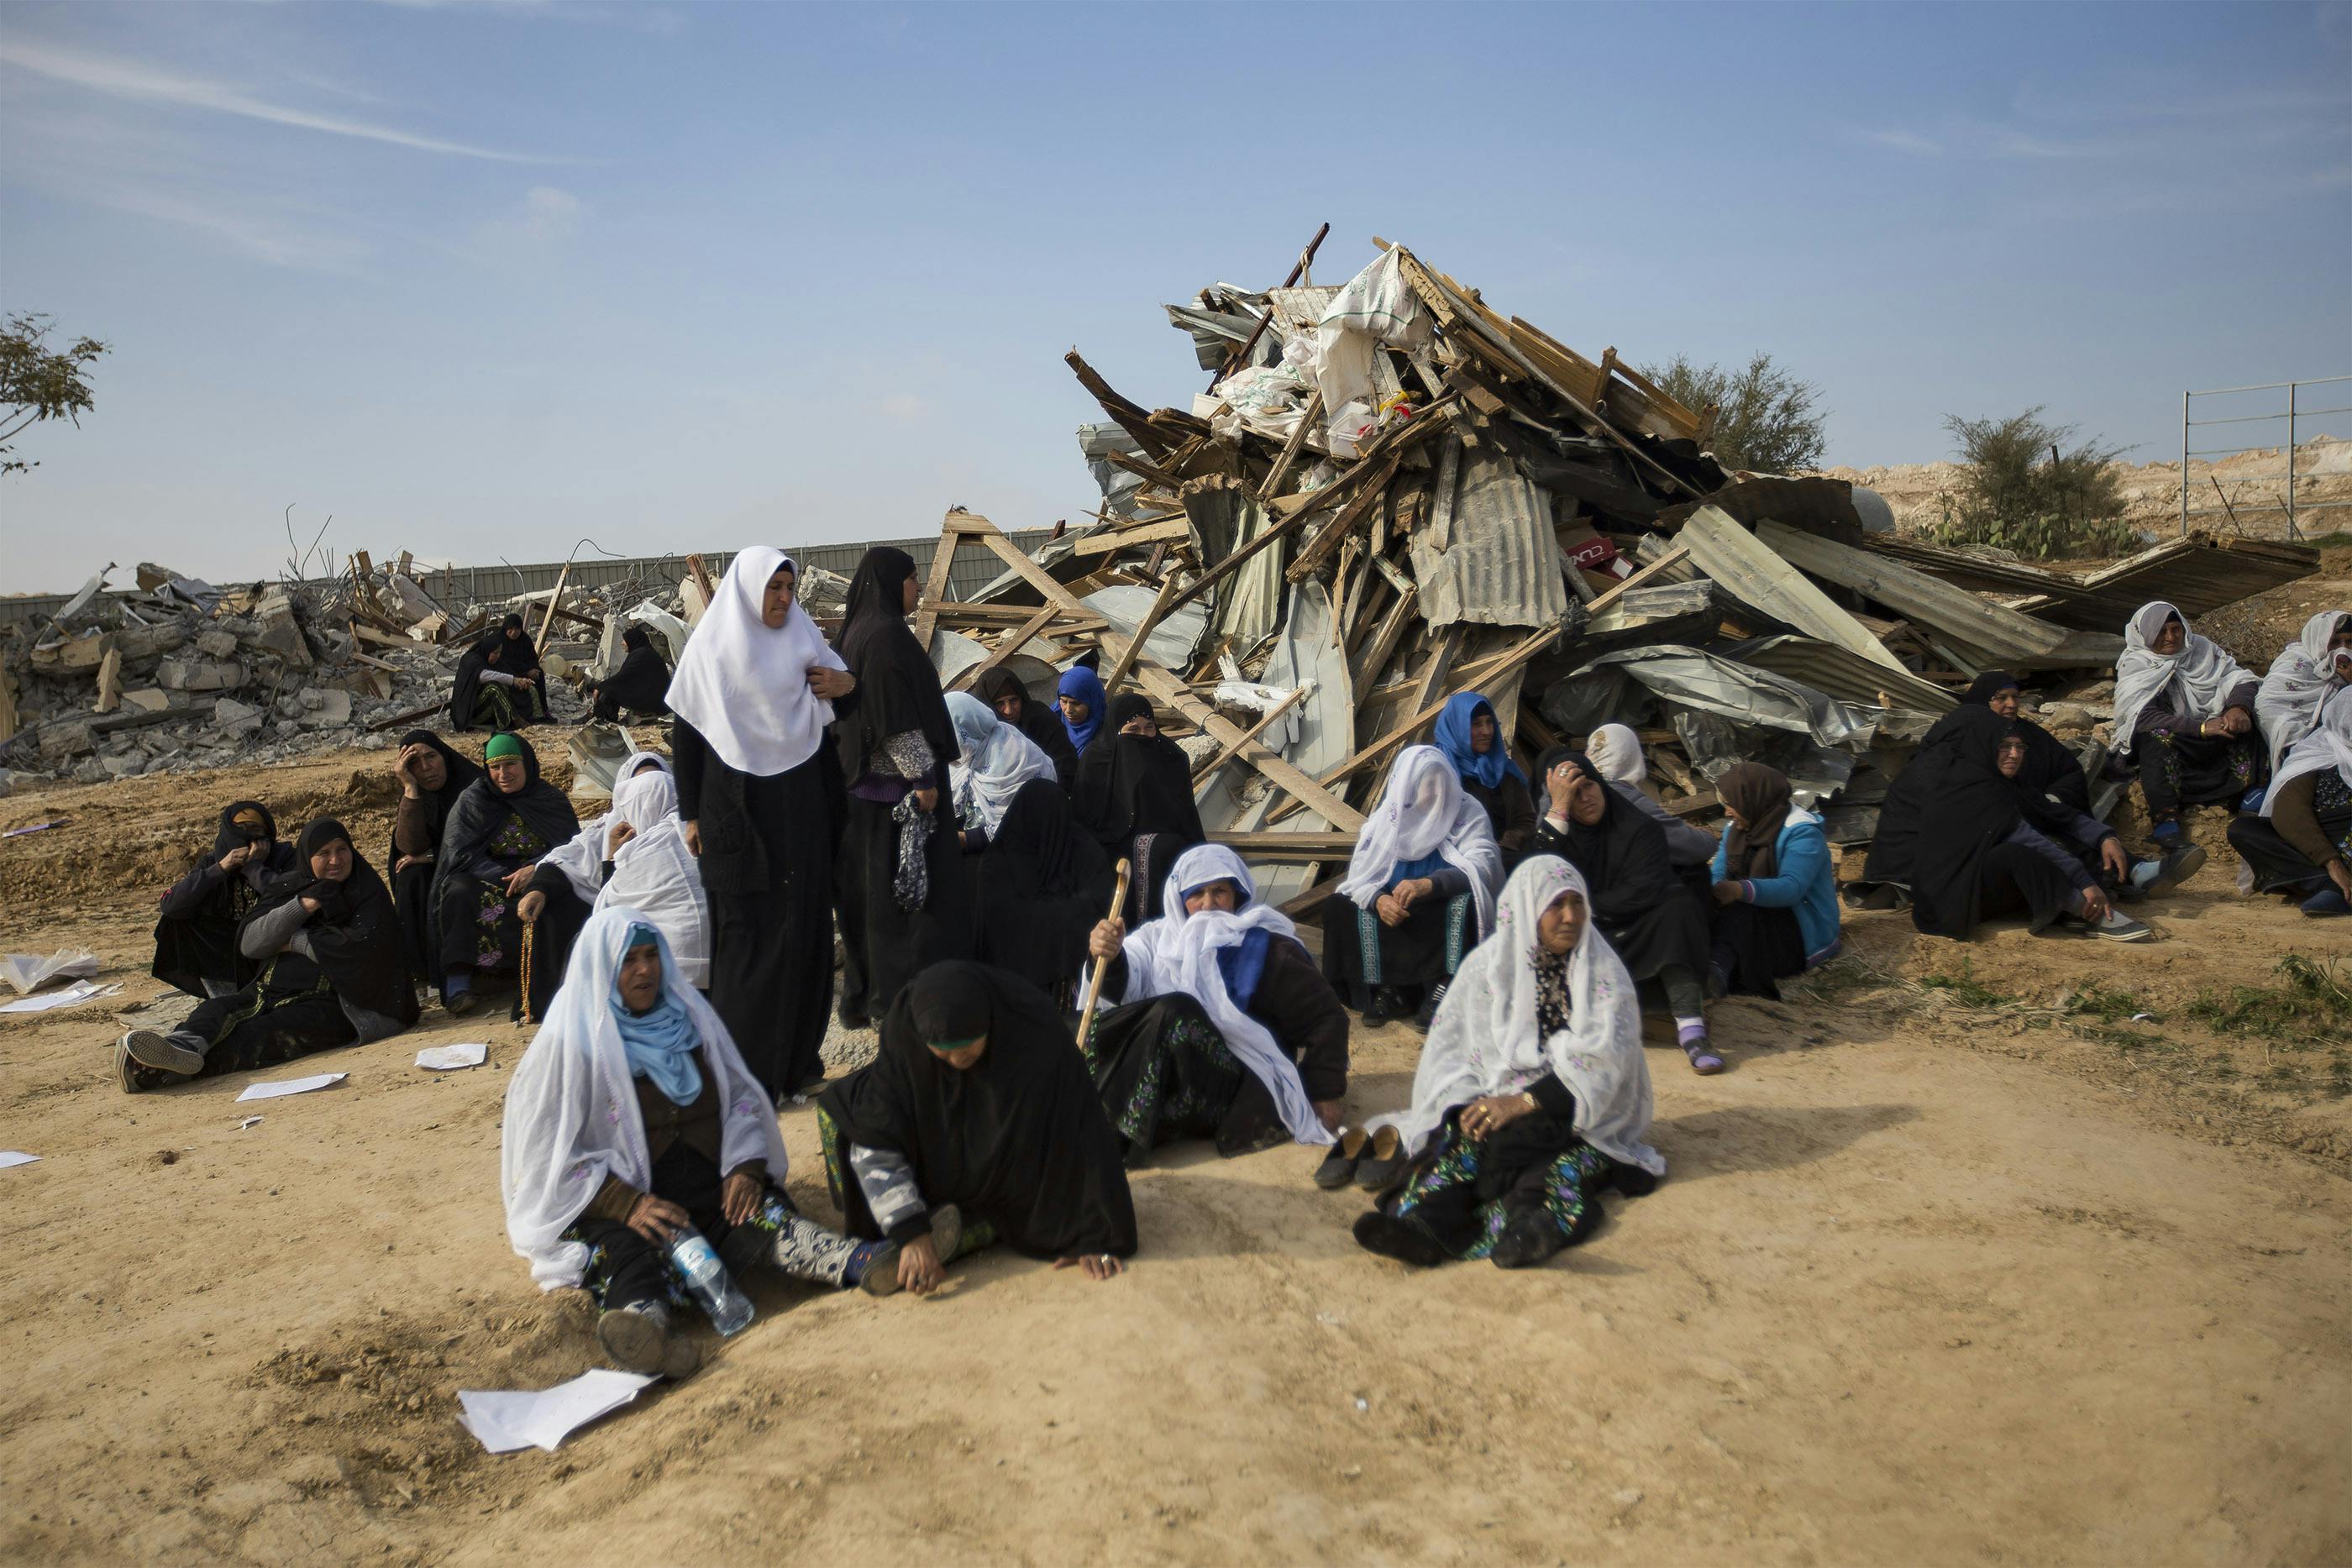  Bedouin women sit next to the ruins of their demolished houses in the unrecognized Bedouin village of Umm Al-Hiran, in the Negev desert, Israel, January 18, 2017. A resident and an Israeli policeman were killed during the operation. Israeli authorities said the policeman was killed in a car-ramming attack, while residences and activists claimed the driver was first shot dead by the police, with no apparent reason, before losing control of his car and driving towards the policemen.&nbsp;The Israeli state plans to completely demolish the village in order to build a Jewish-only town on that land.  	Faiz Abu Rmeleh